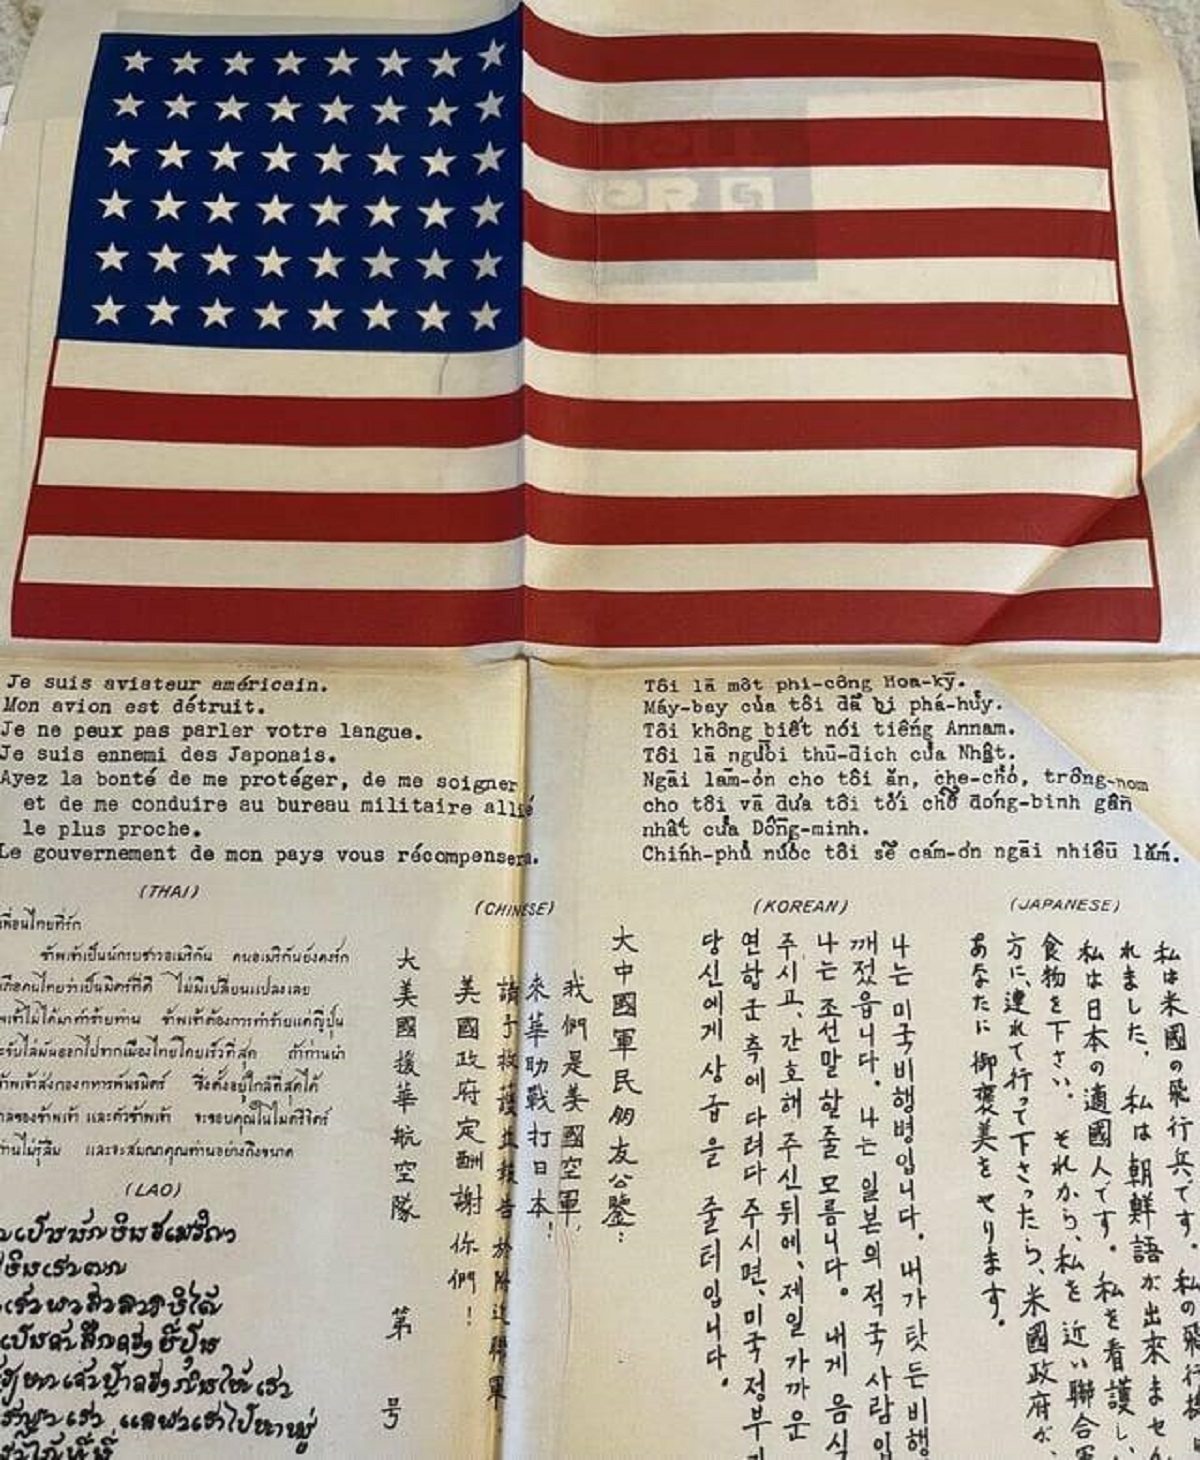 "My great uncle’s “blood chit” from fighting in WWII."